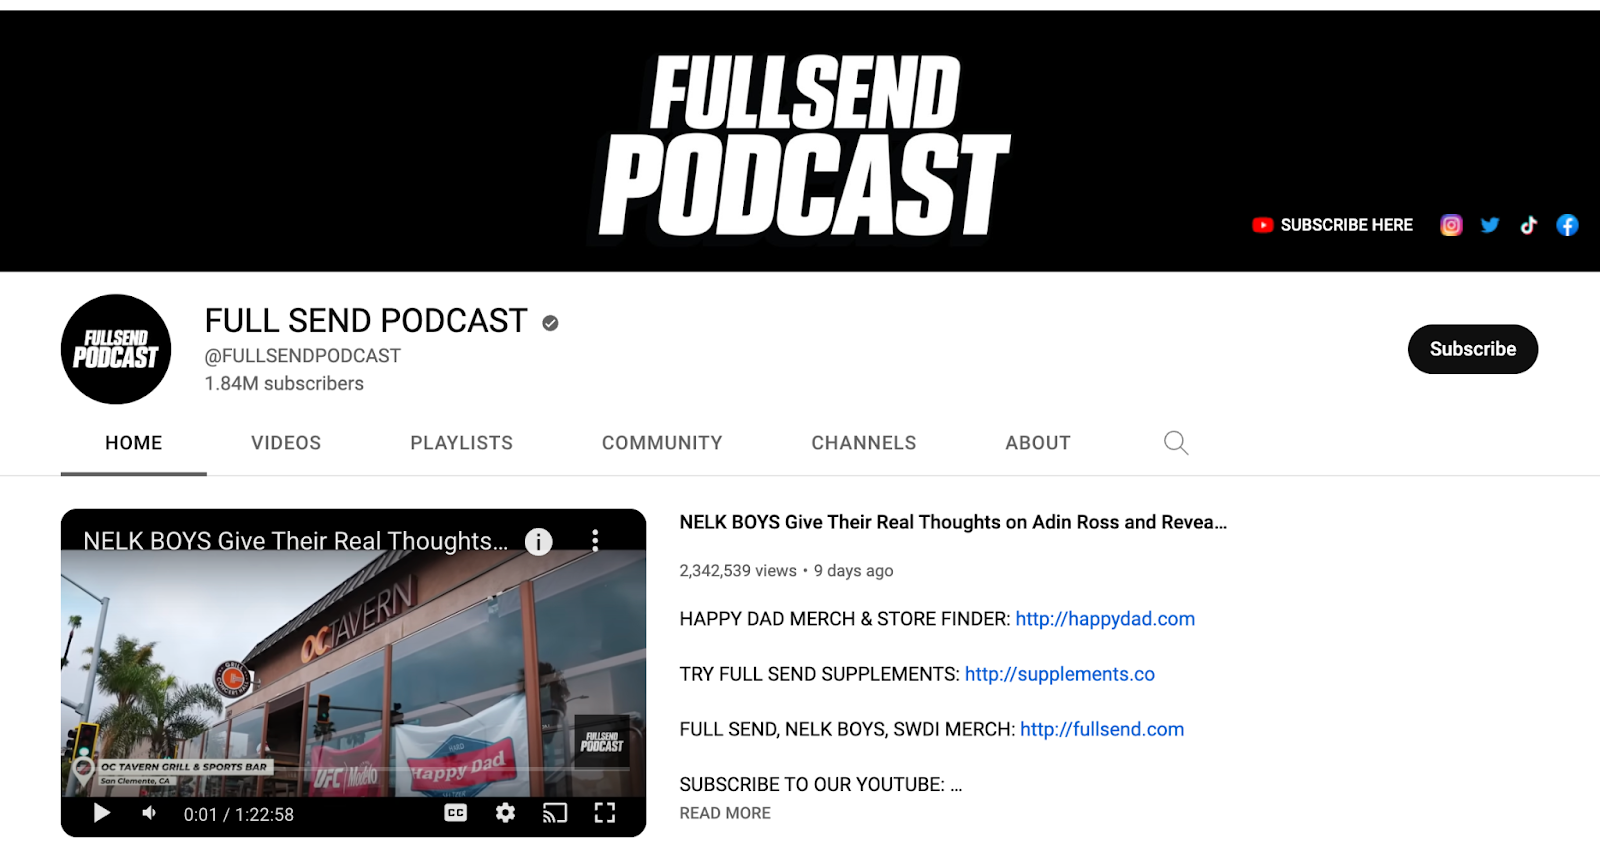 Full Send Podcast A Comprehensive Guide To One Of The Most Popular Podcasts On Pop Culture And Entertainment 